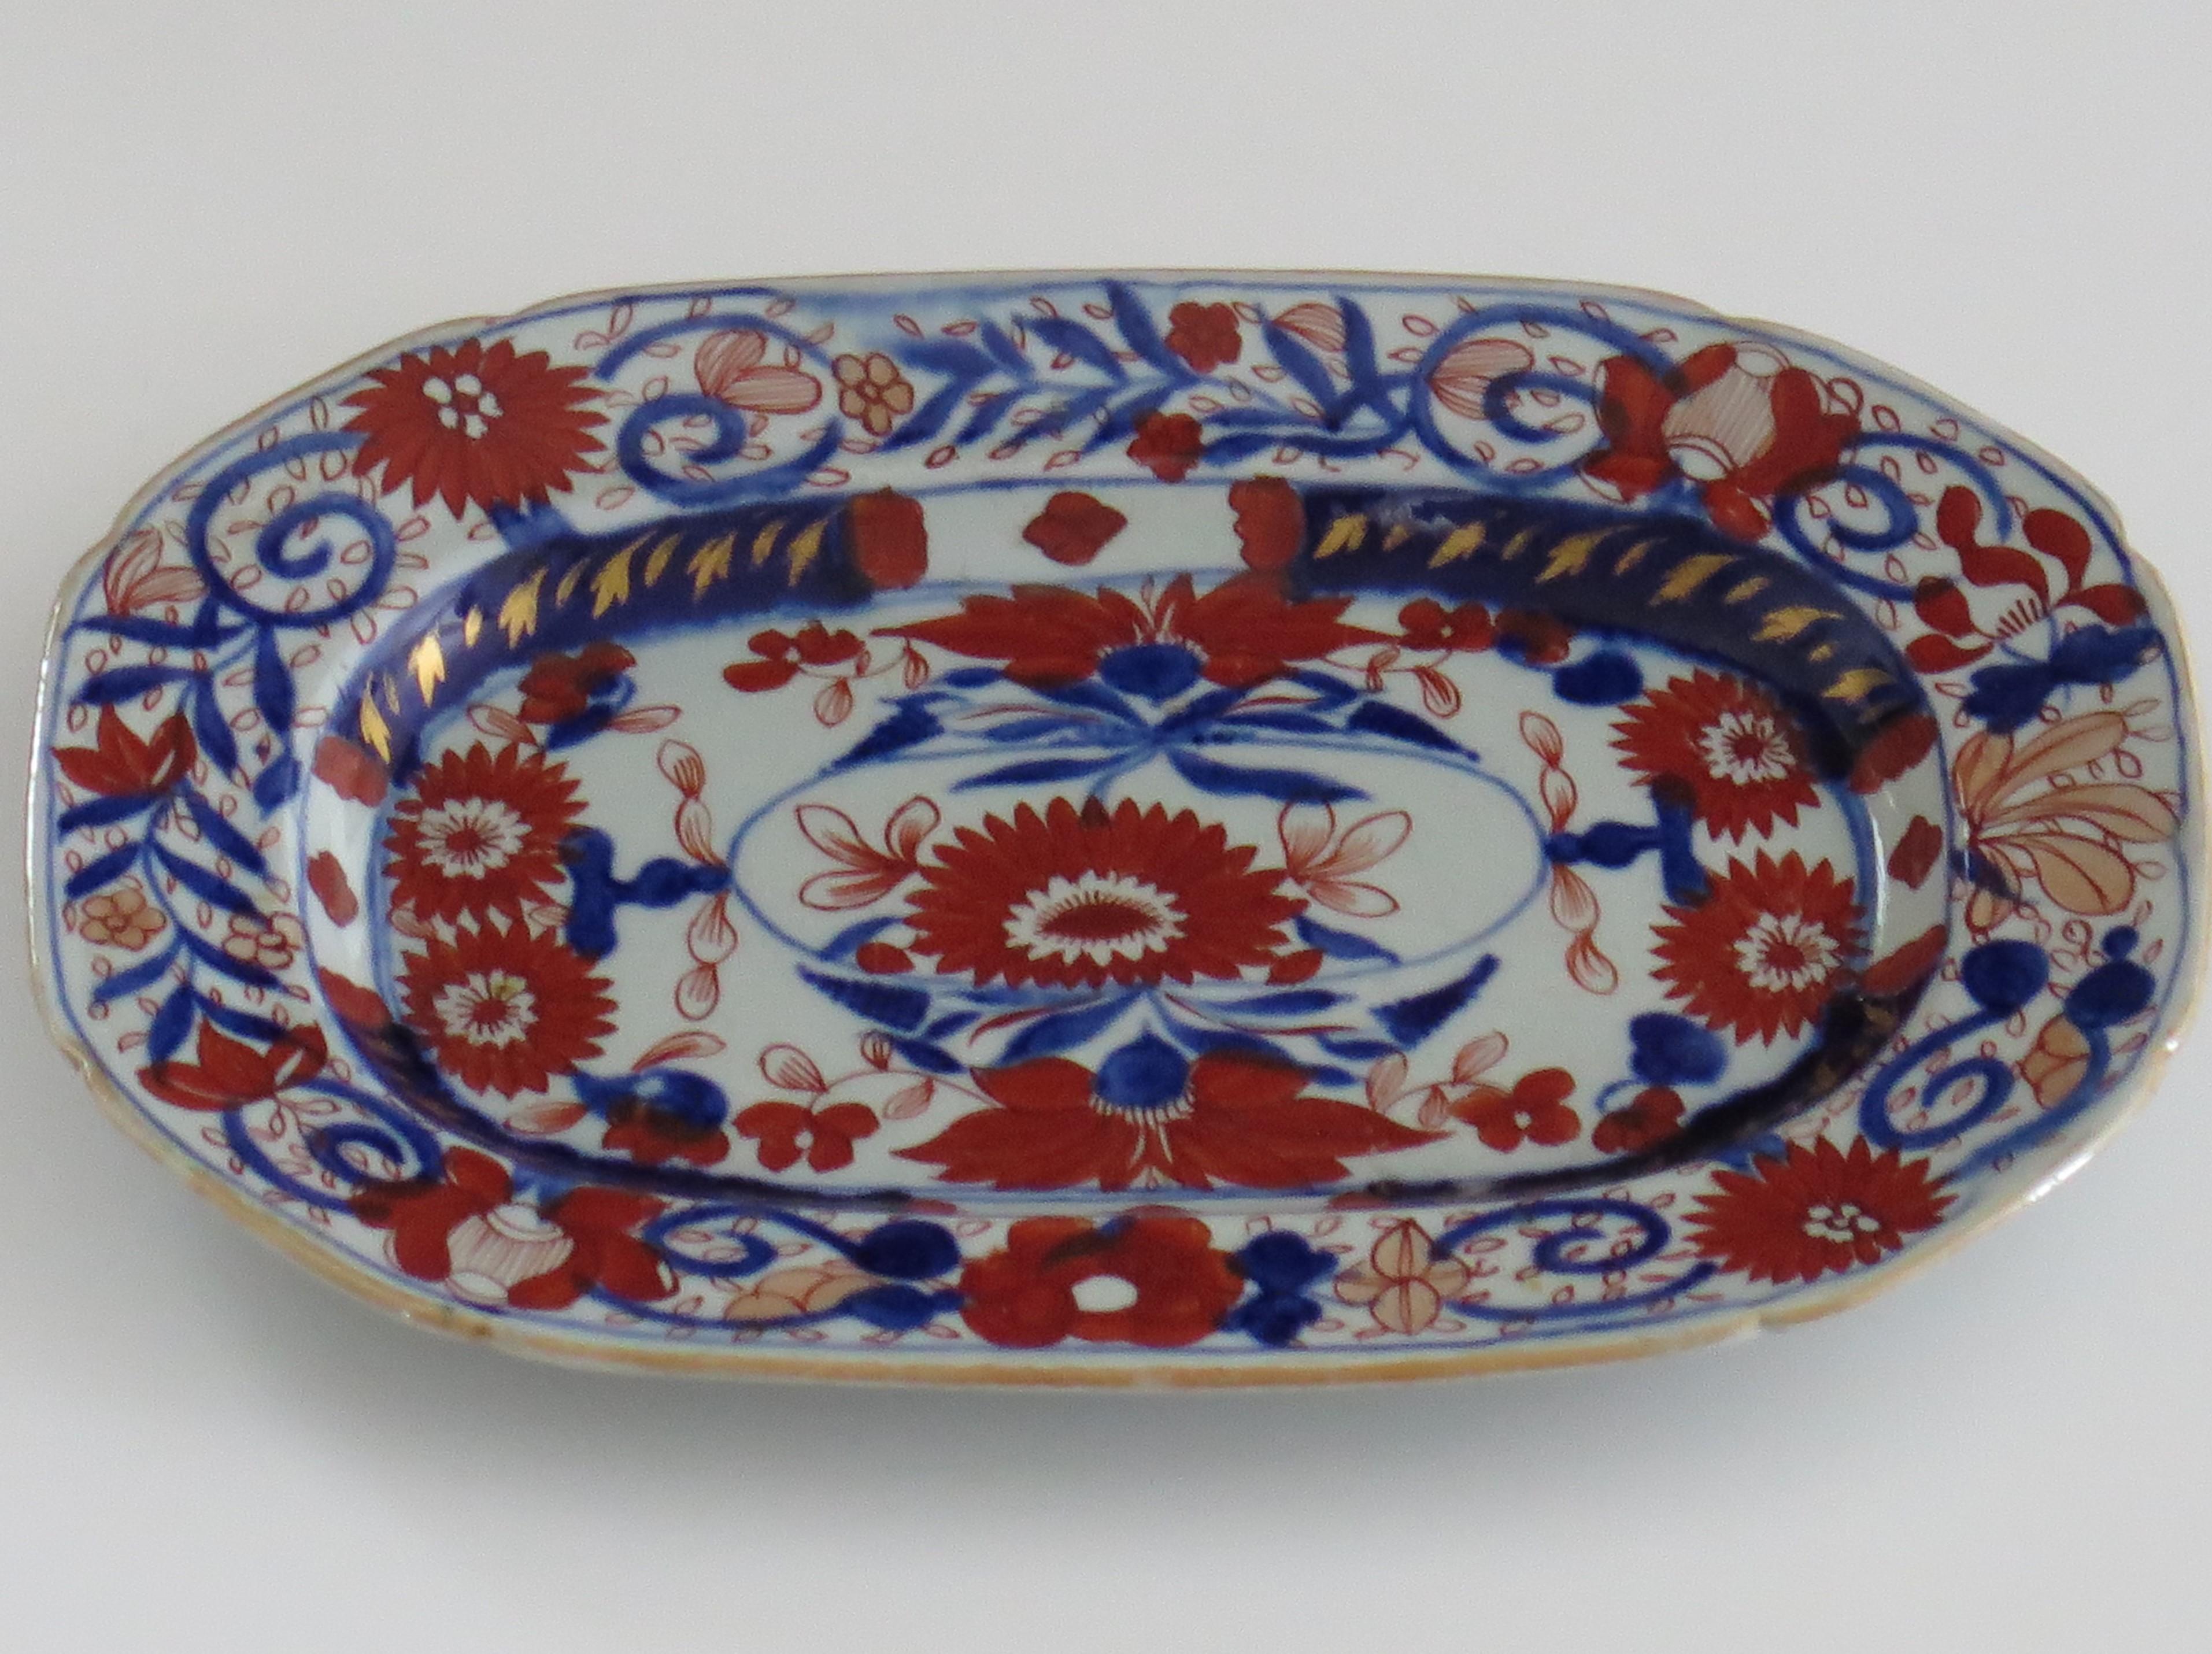 This is a very decorative small rectangular serving platter by Mason's Ironstone, Lane Delph, England in the stylised Chrysanthemum pattern, dating to the very early period of Mason's ironstone, circa 1818.

The platter or dish is rectangular in